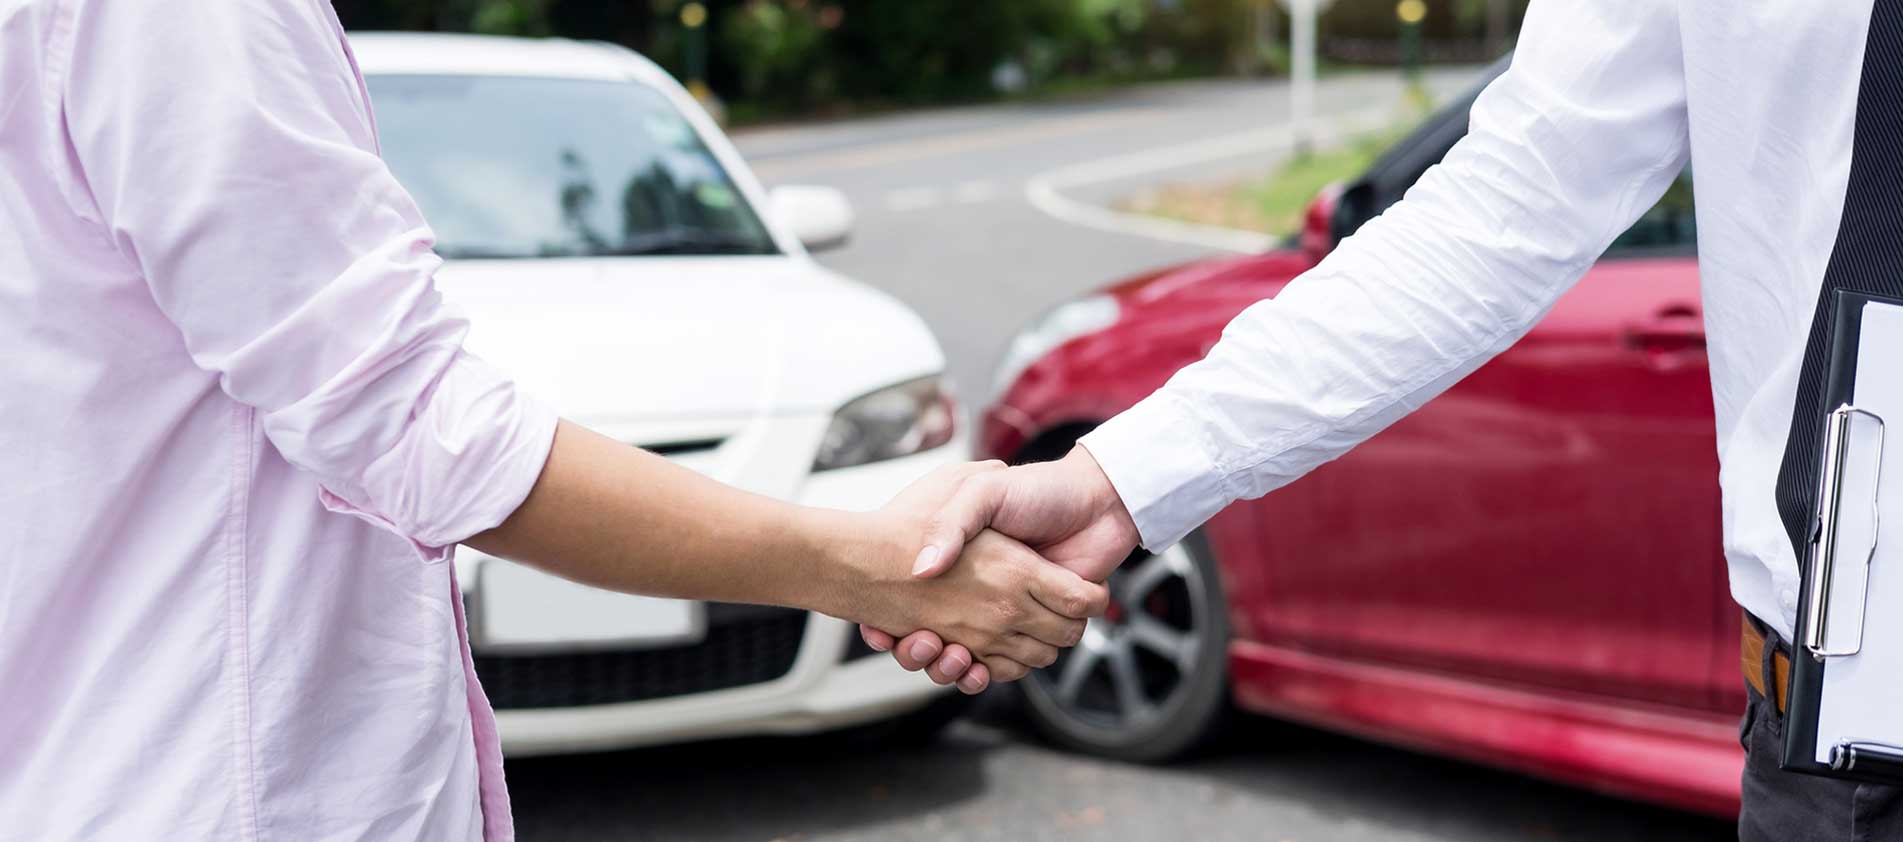 Used cars for sale in Wantagh | No Limit Auto Leasing. Wantagh New York